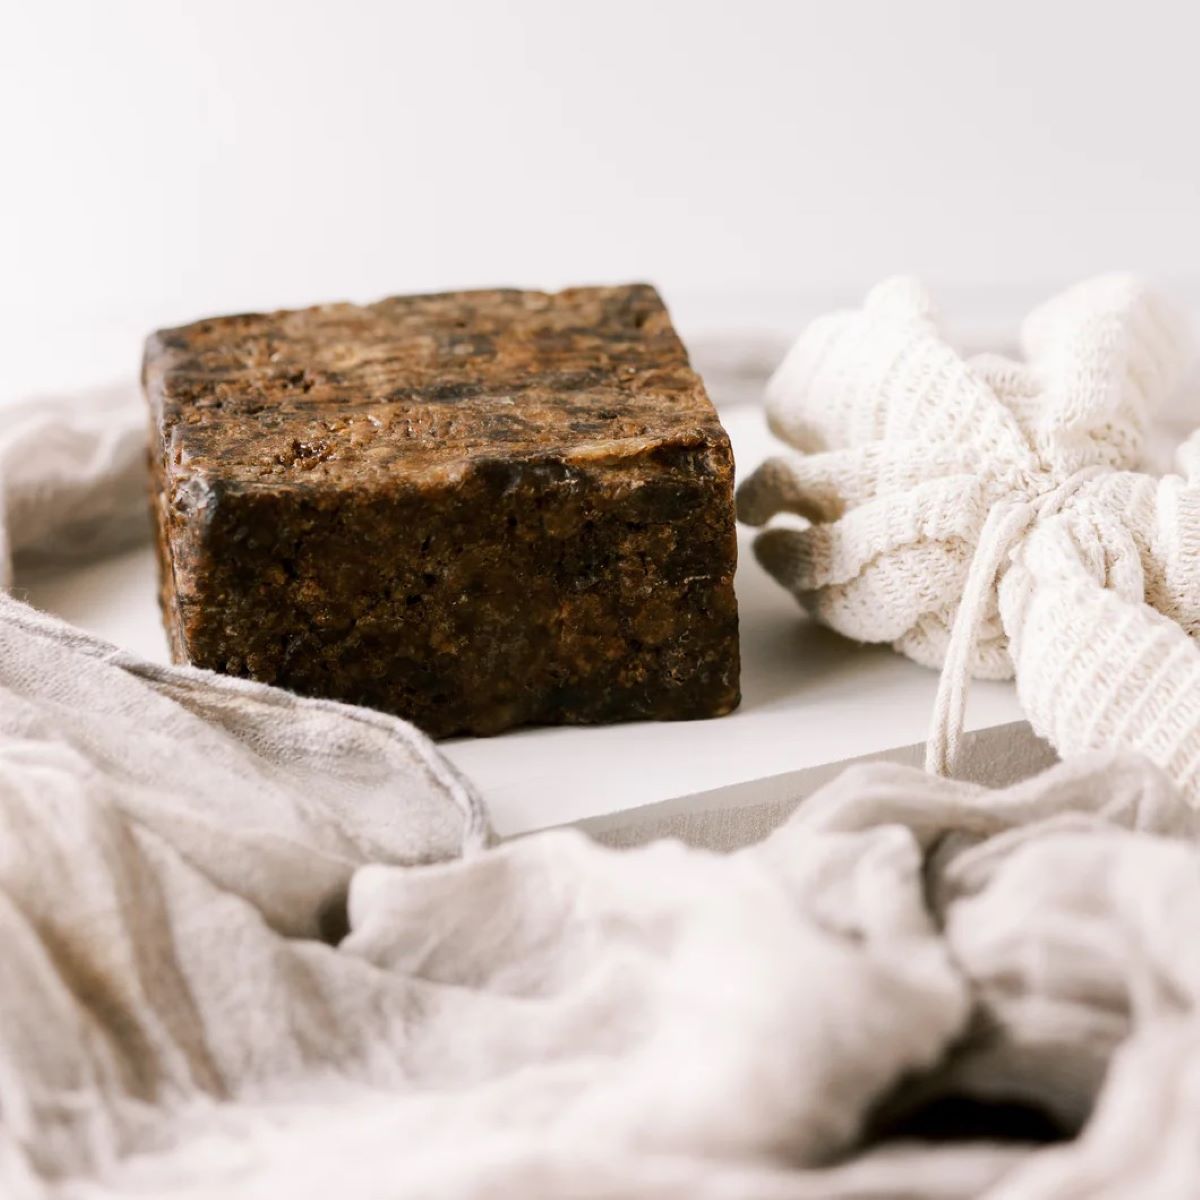 How To Store African Black Soap